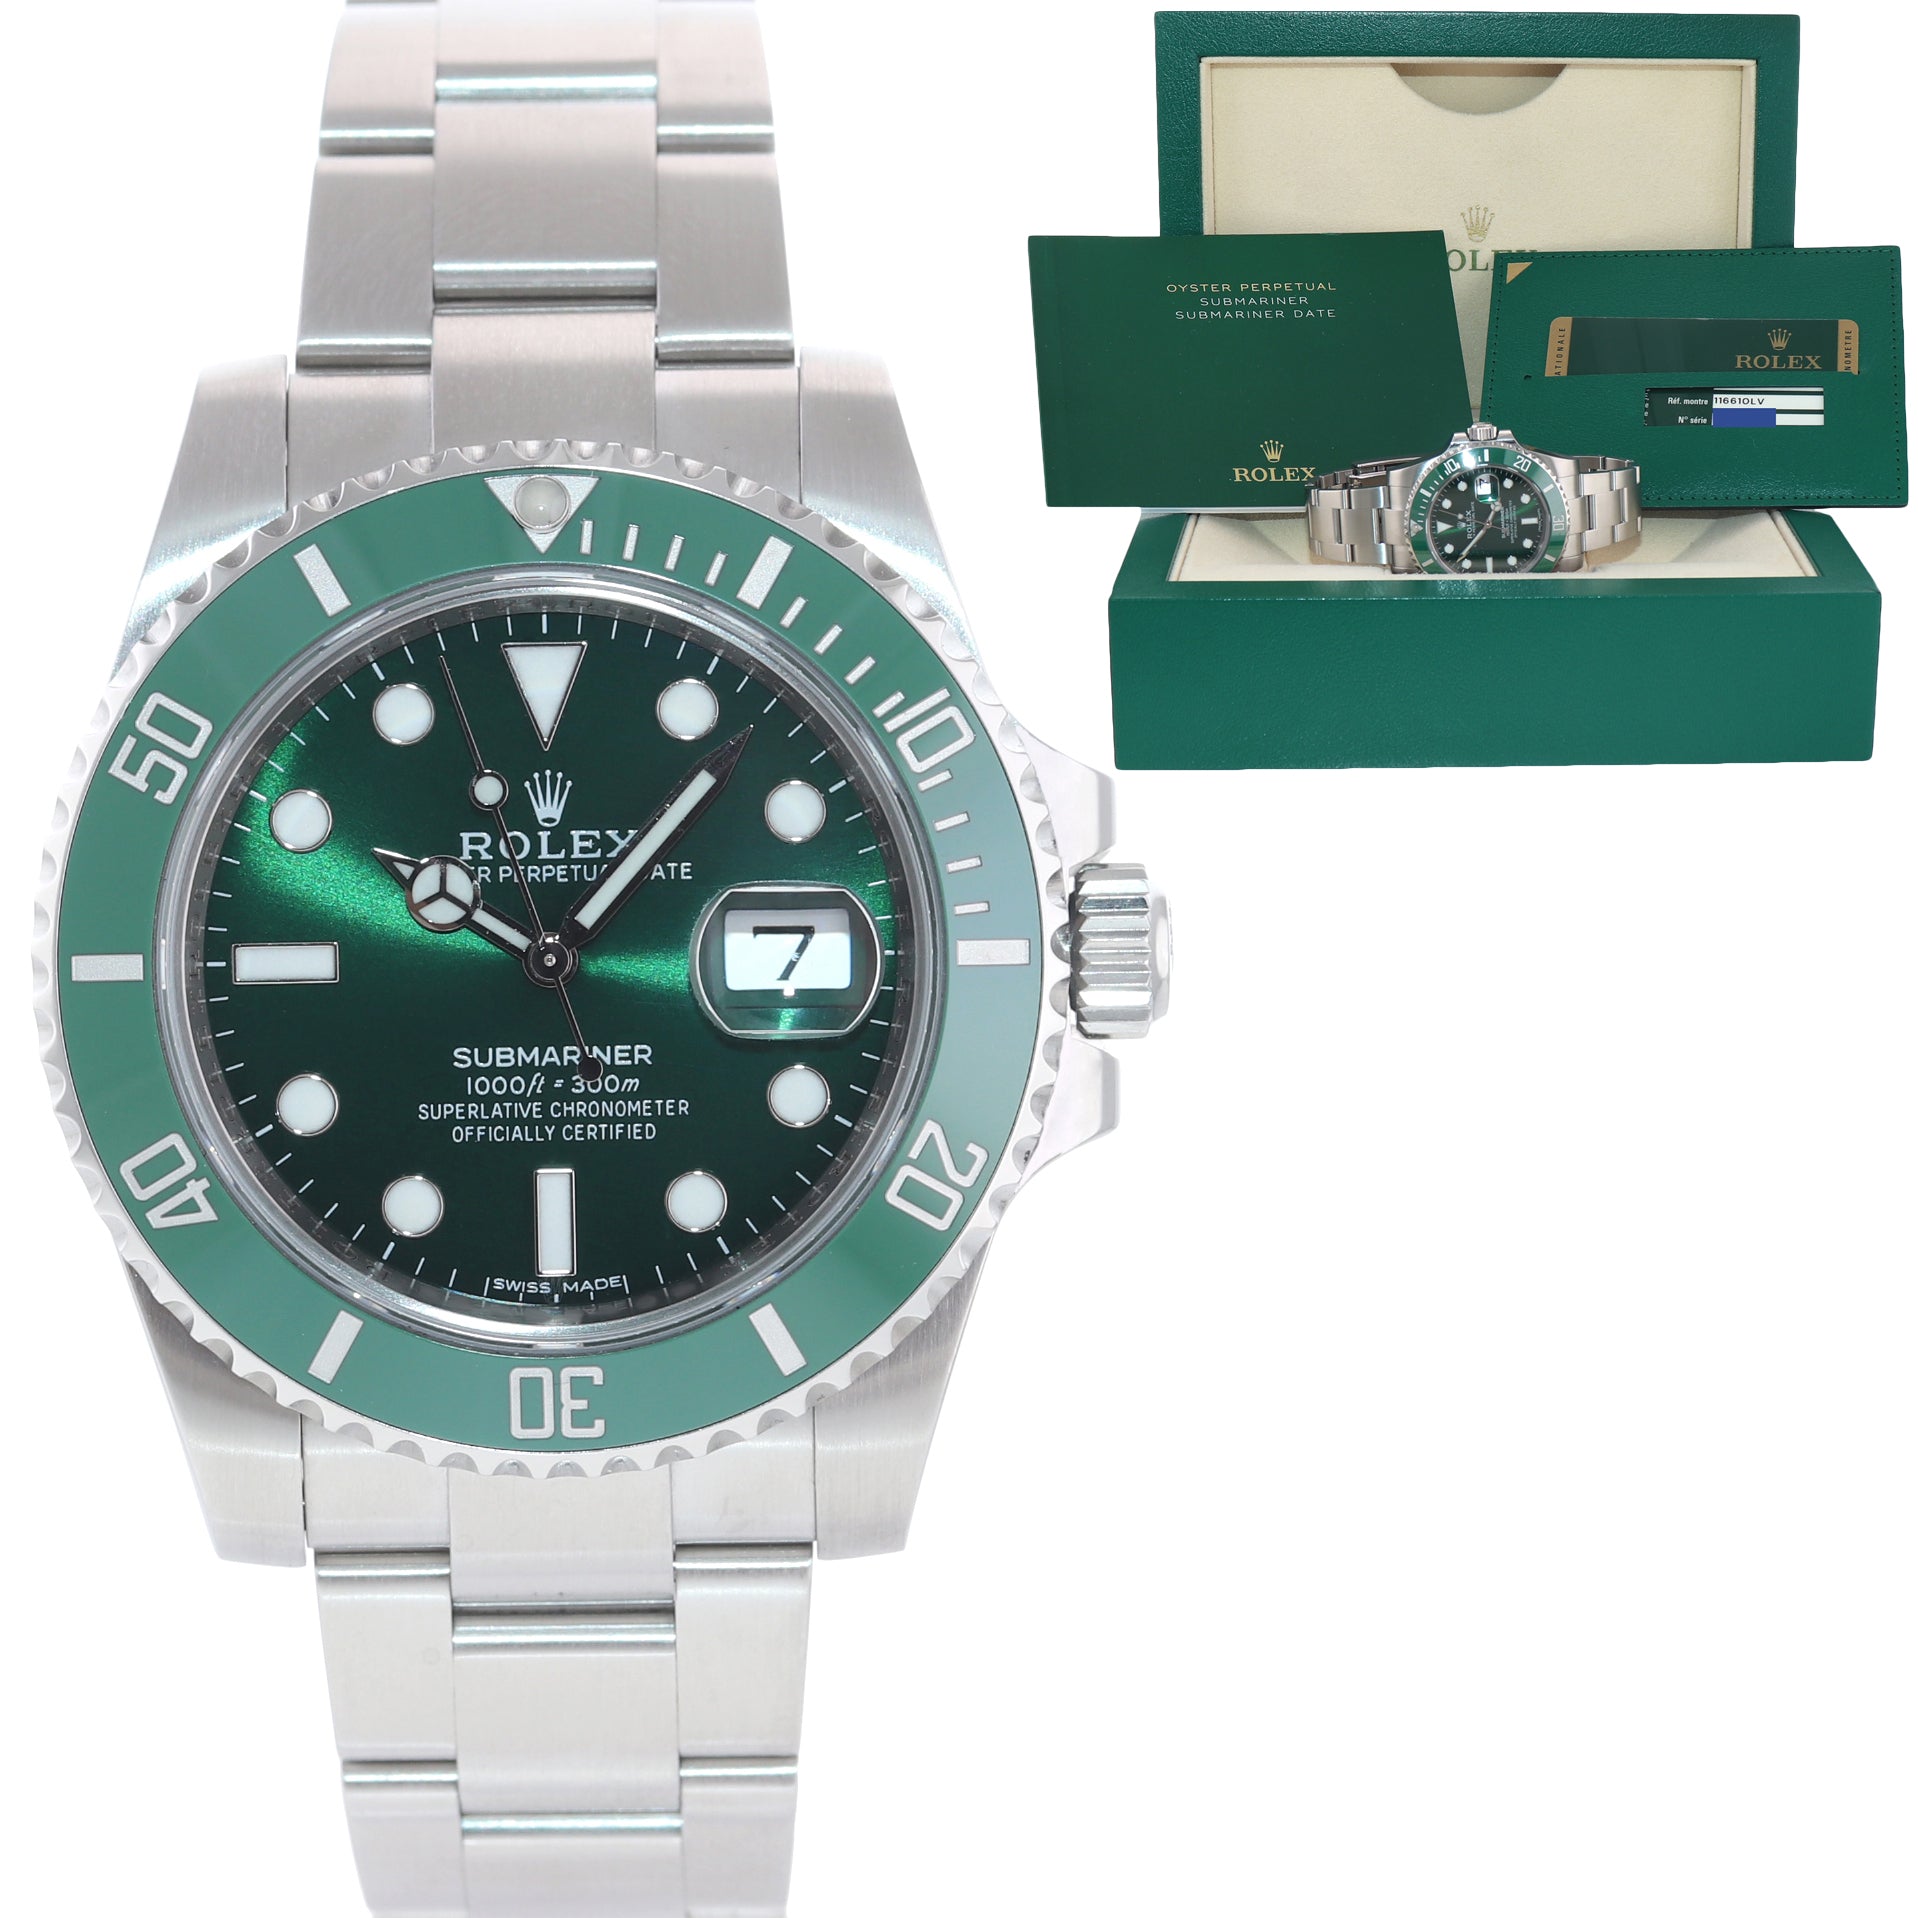 MINT 2014 PAPERS Rolex Submariner Hulk Green Dial Ceramic 116610LV Steel Watch